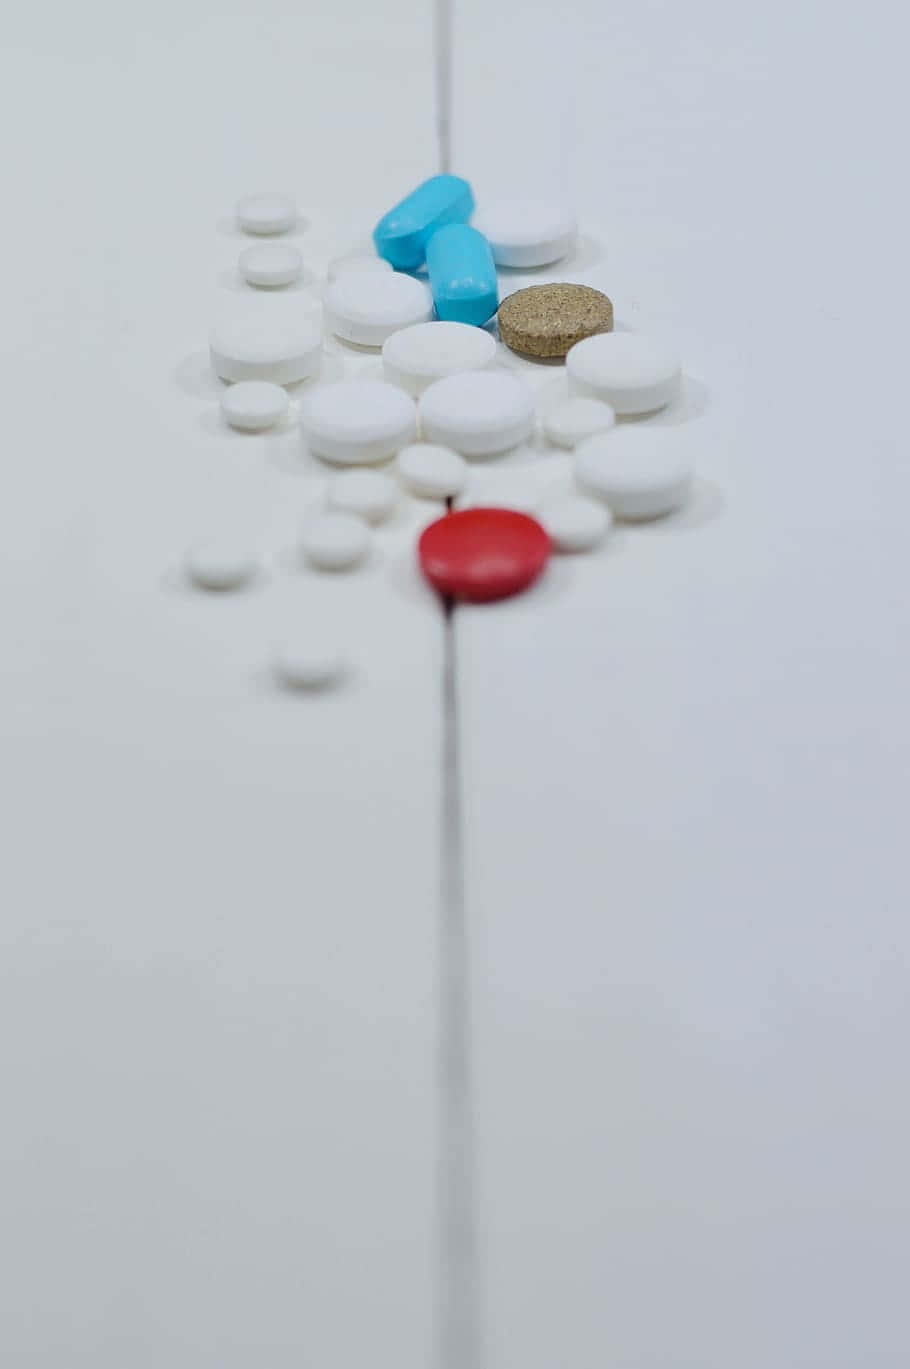 A Line Of Pills On A White Surface